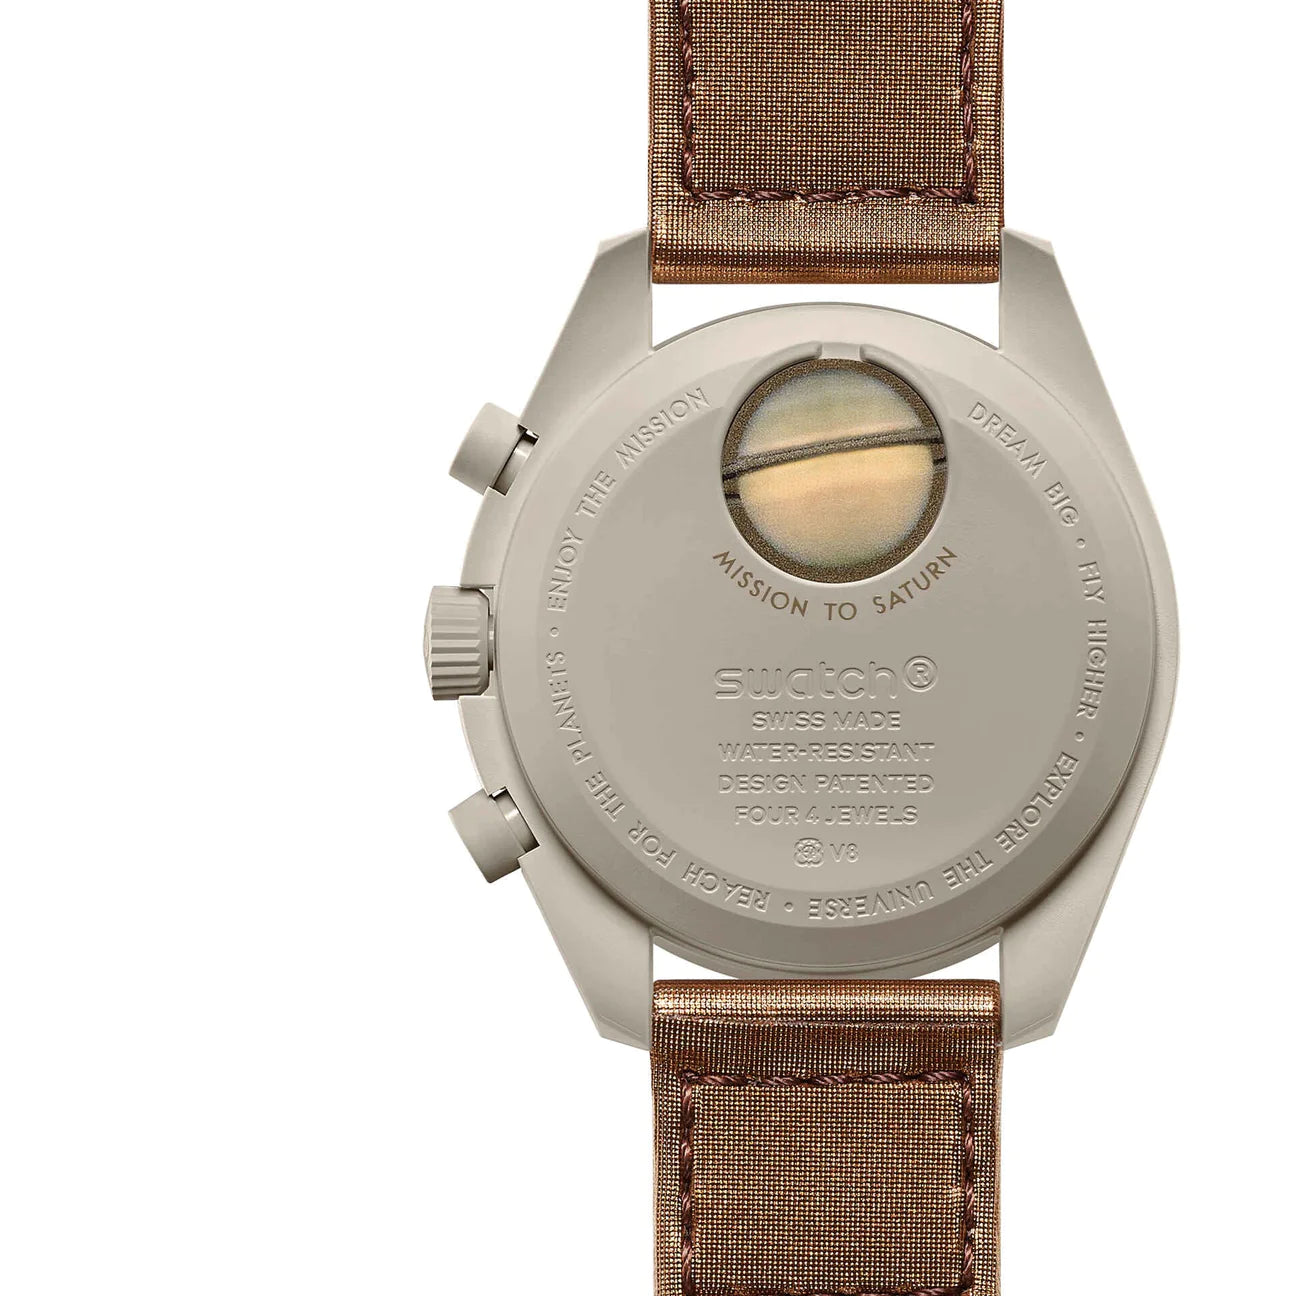 Swatch x Omega Bioceramic Moonswatch Mission to Saturn "SO33T100"